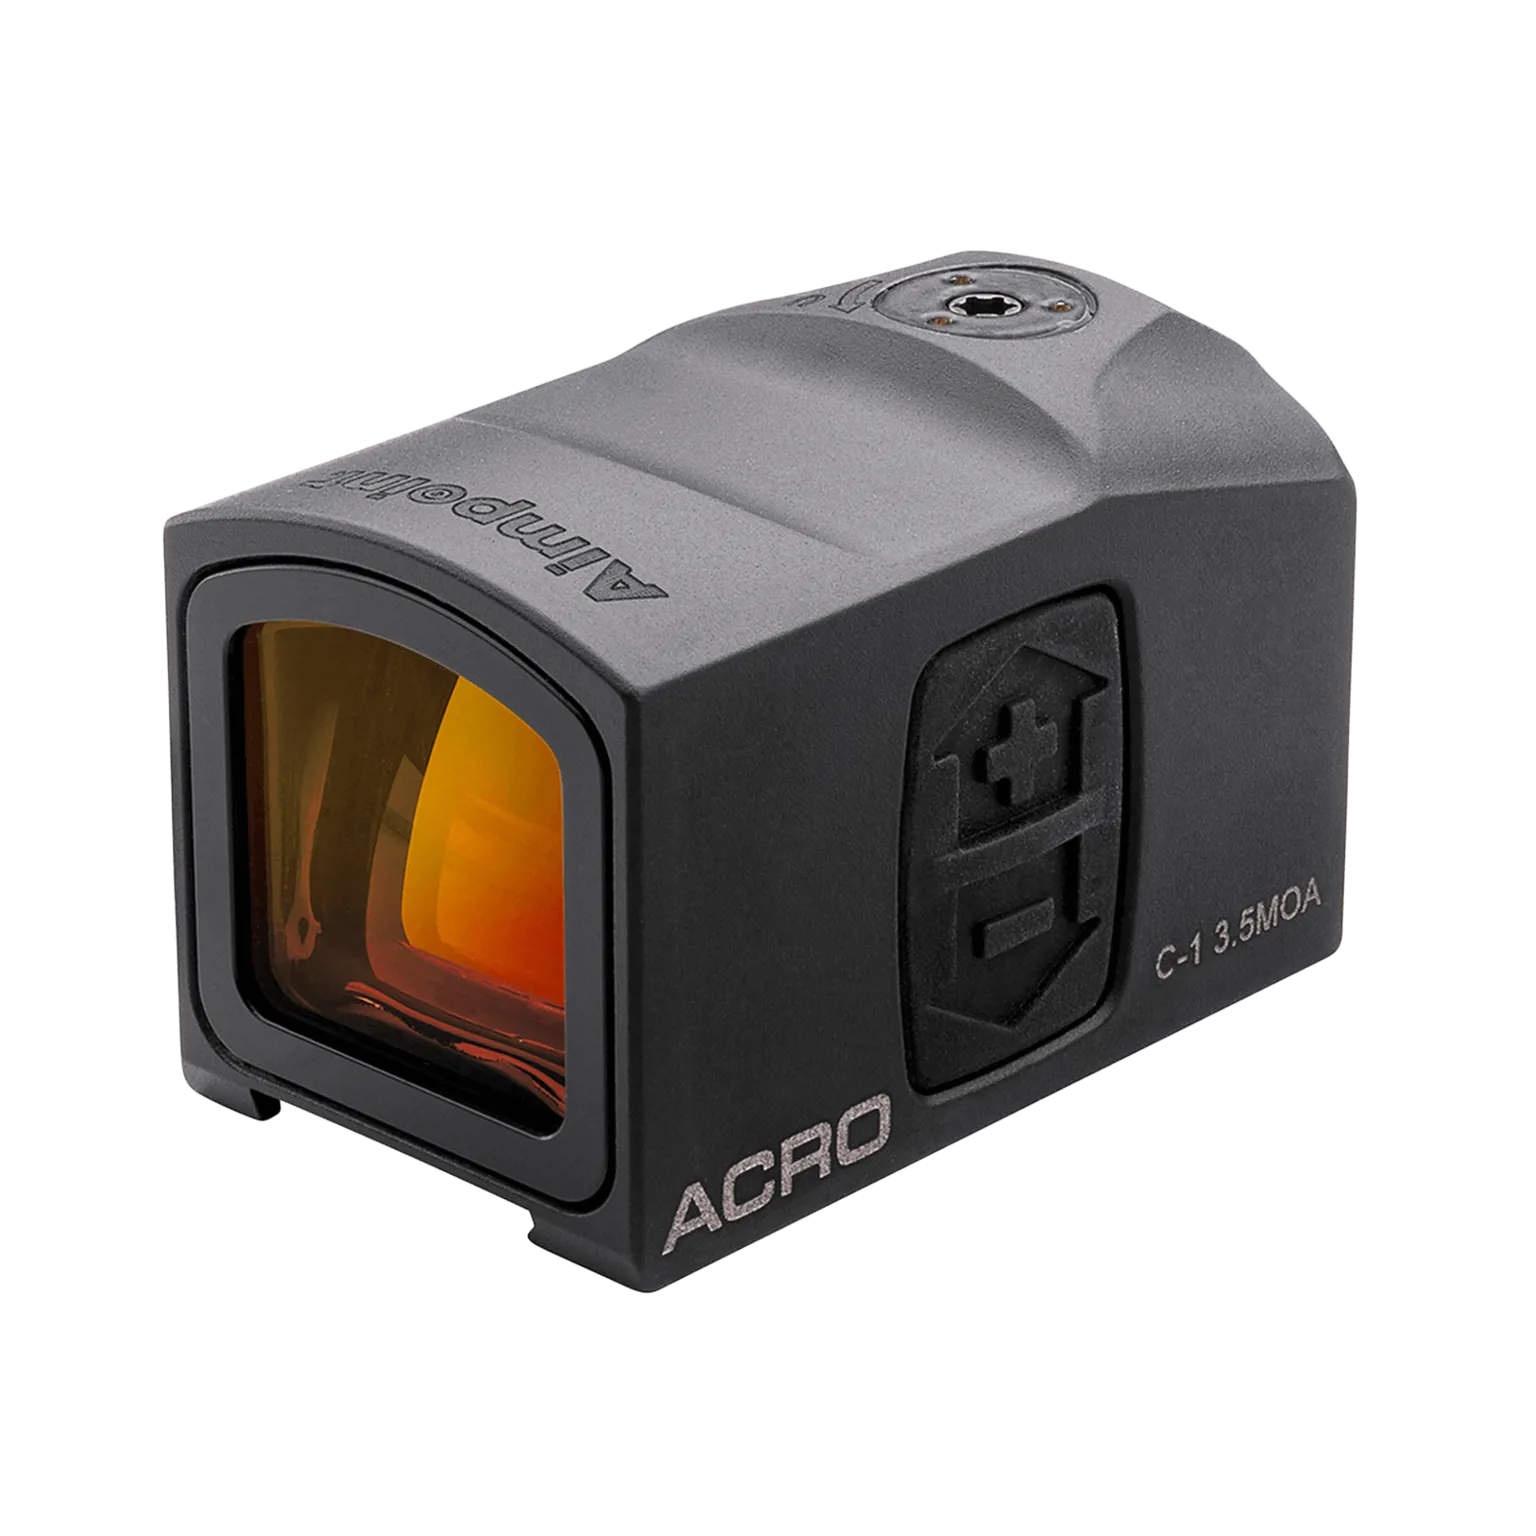 Acro C-1™ 3.5 MOA - Red dot reflex sight with integrated Acro™ interface - 1